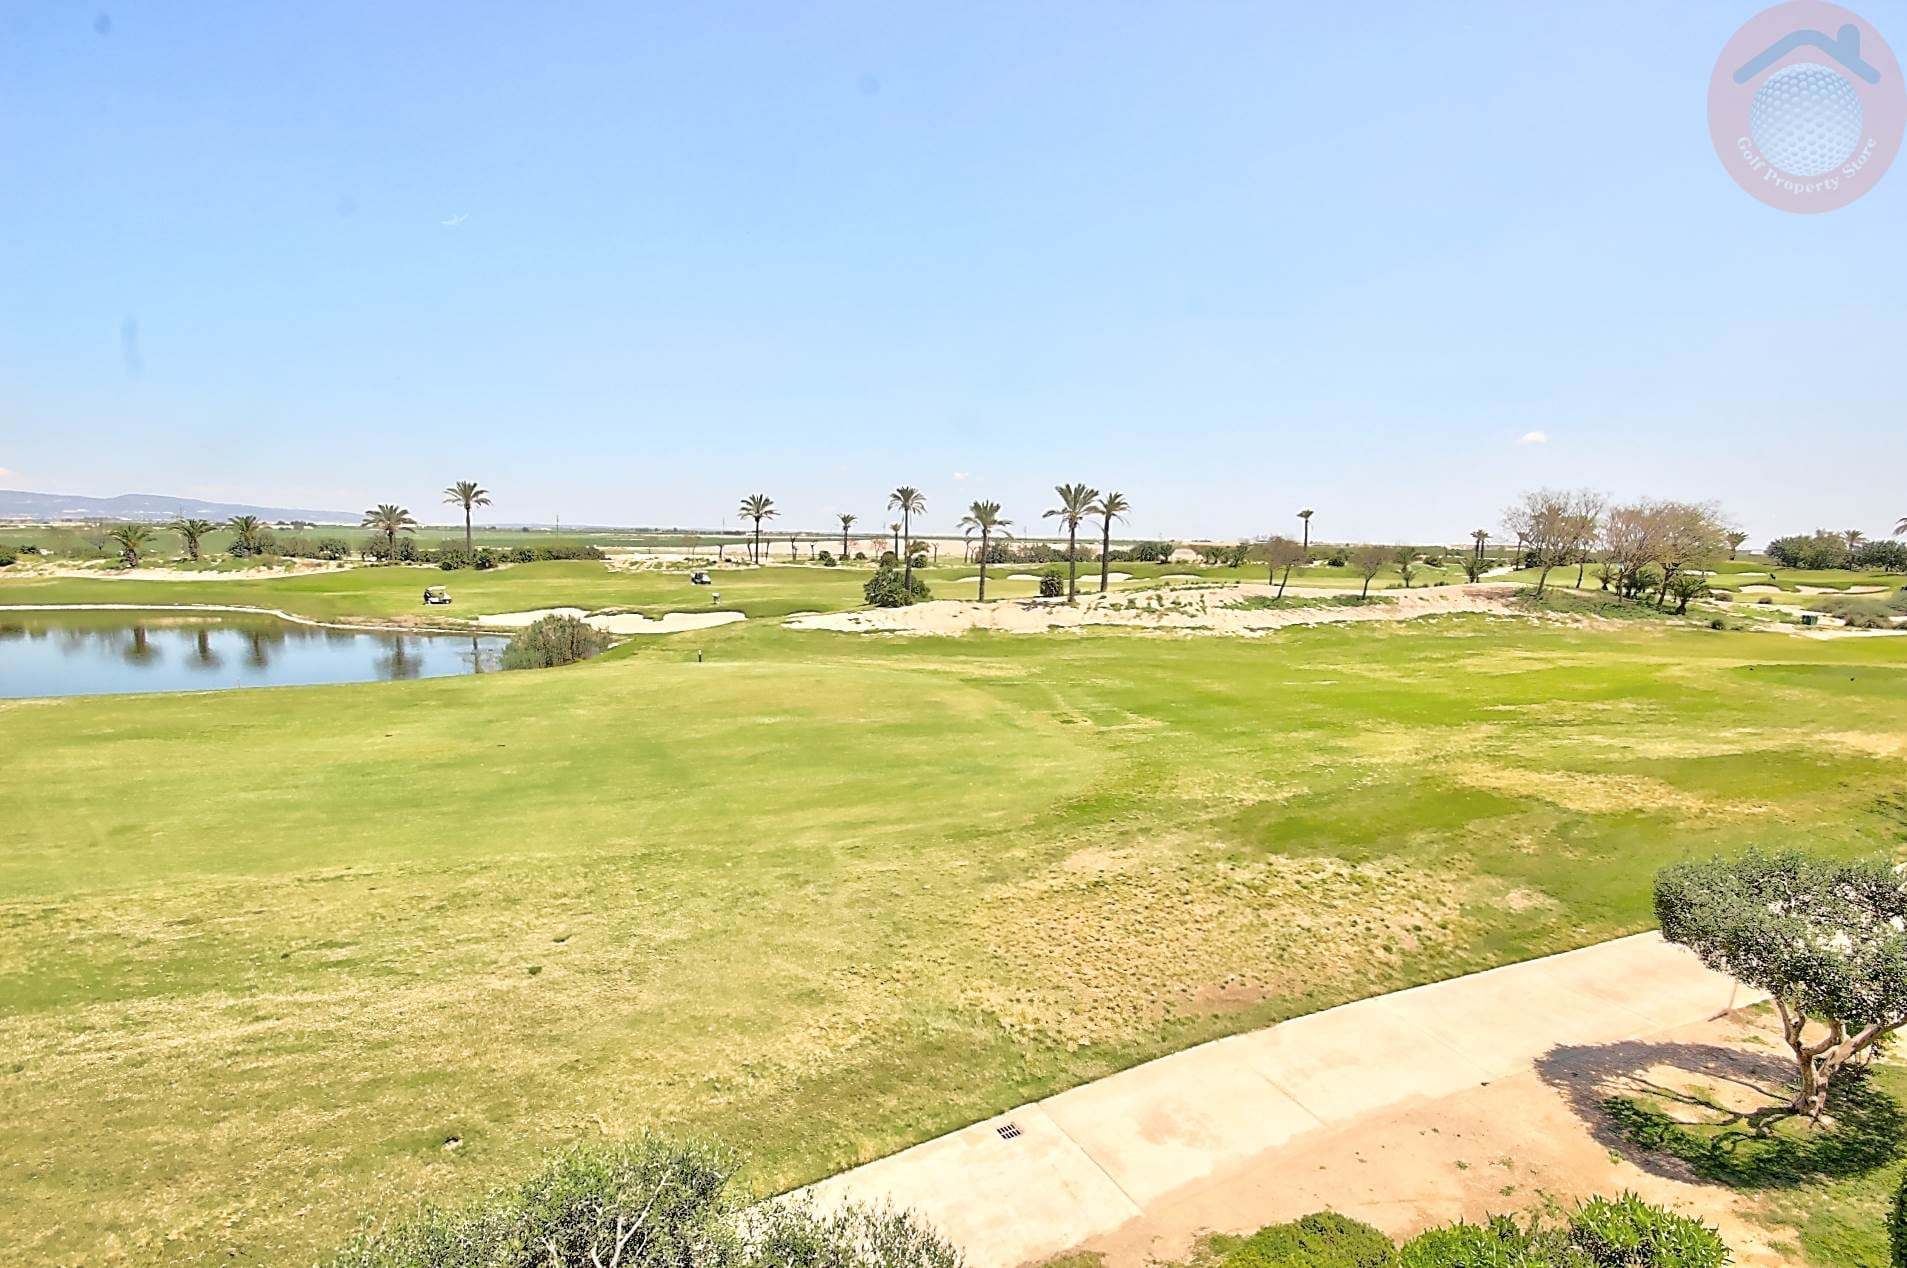 LA TORRE GOLF RESORT 2 BED CORNER APARTMENT WITH HUGE TERRACE AND STUNNING VIEWS